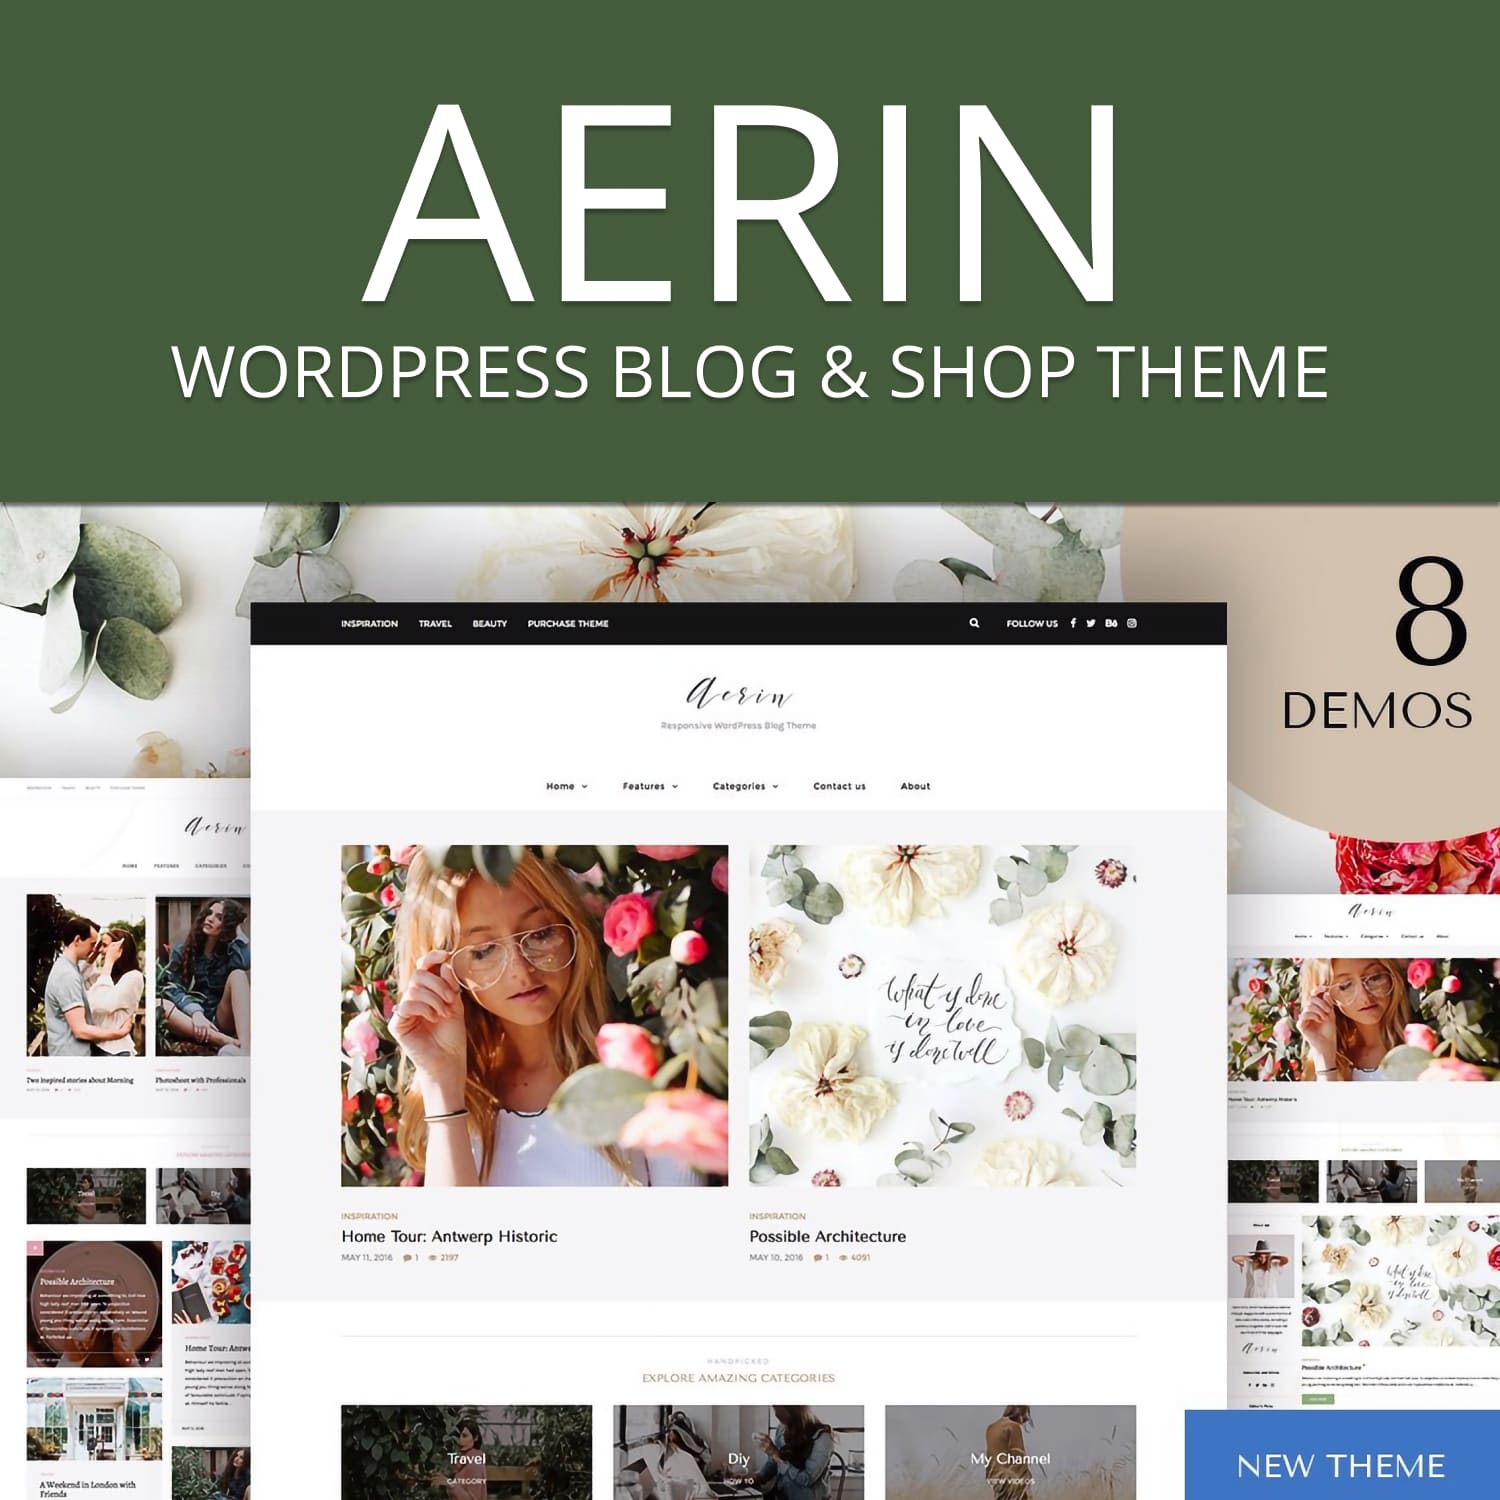 Preview new theme of Aerin wordpress blog.